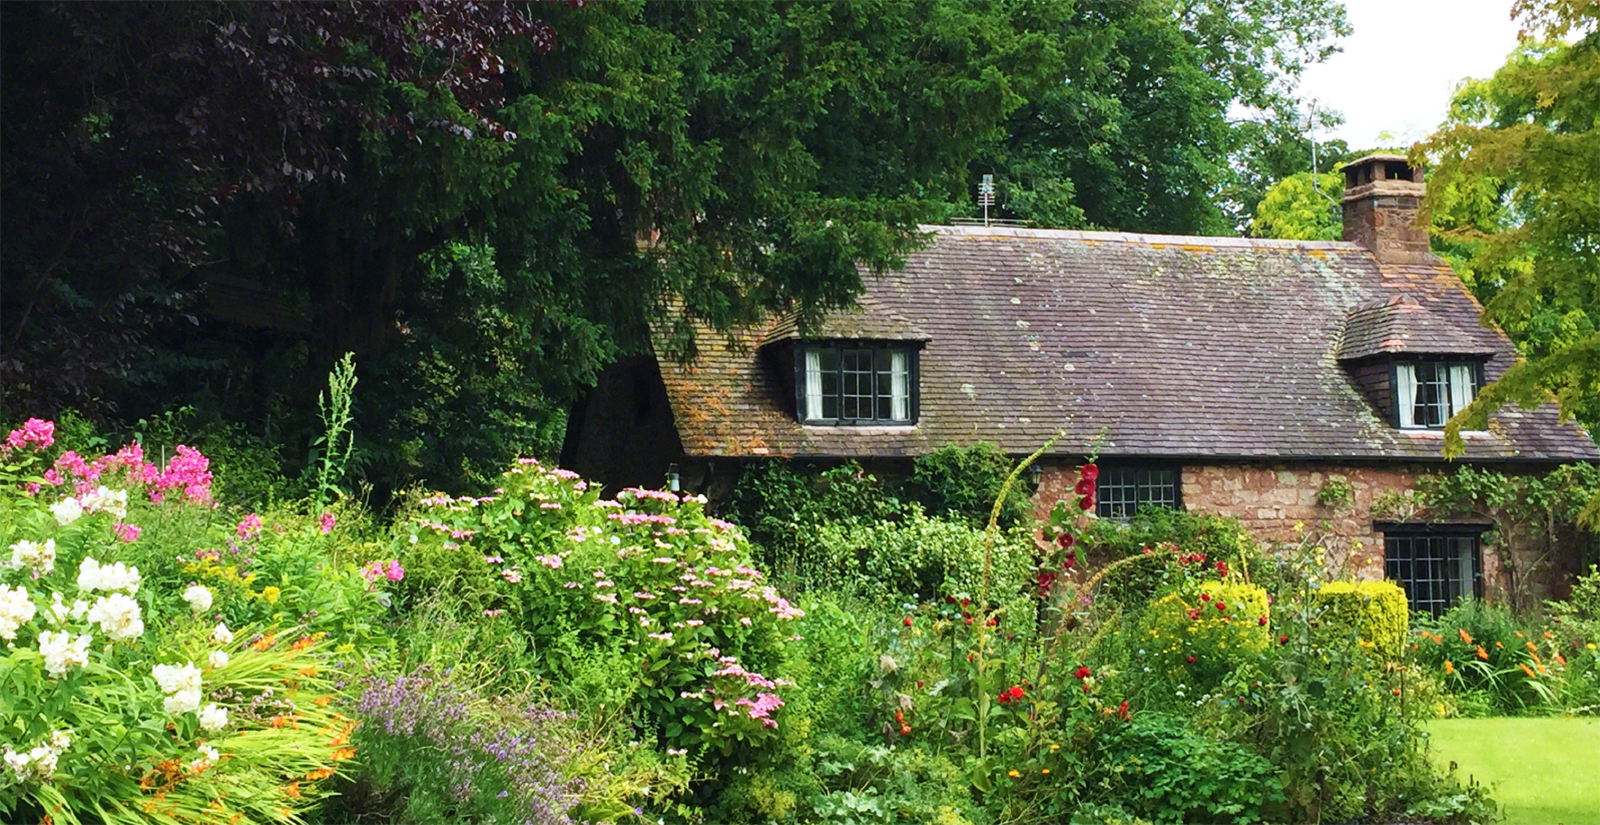 Cottage in somerset